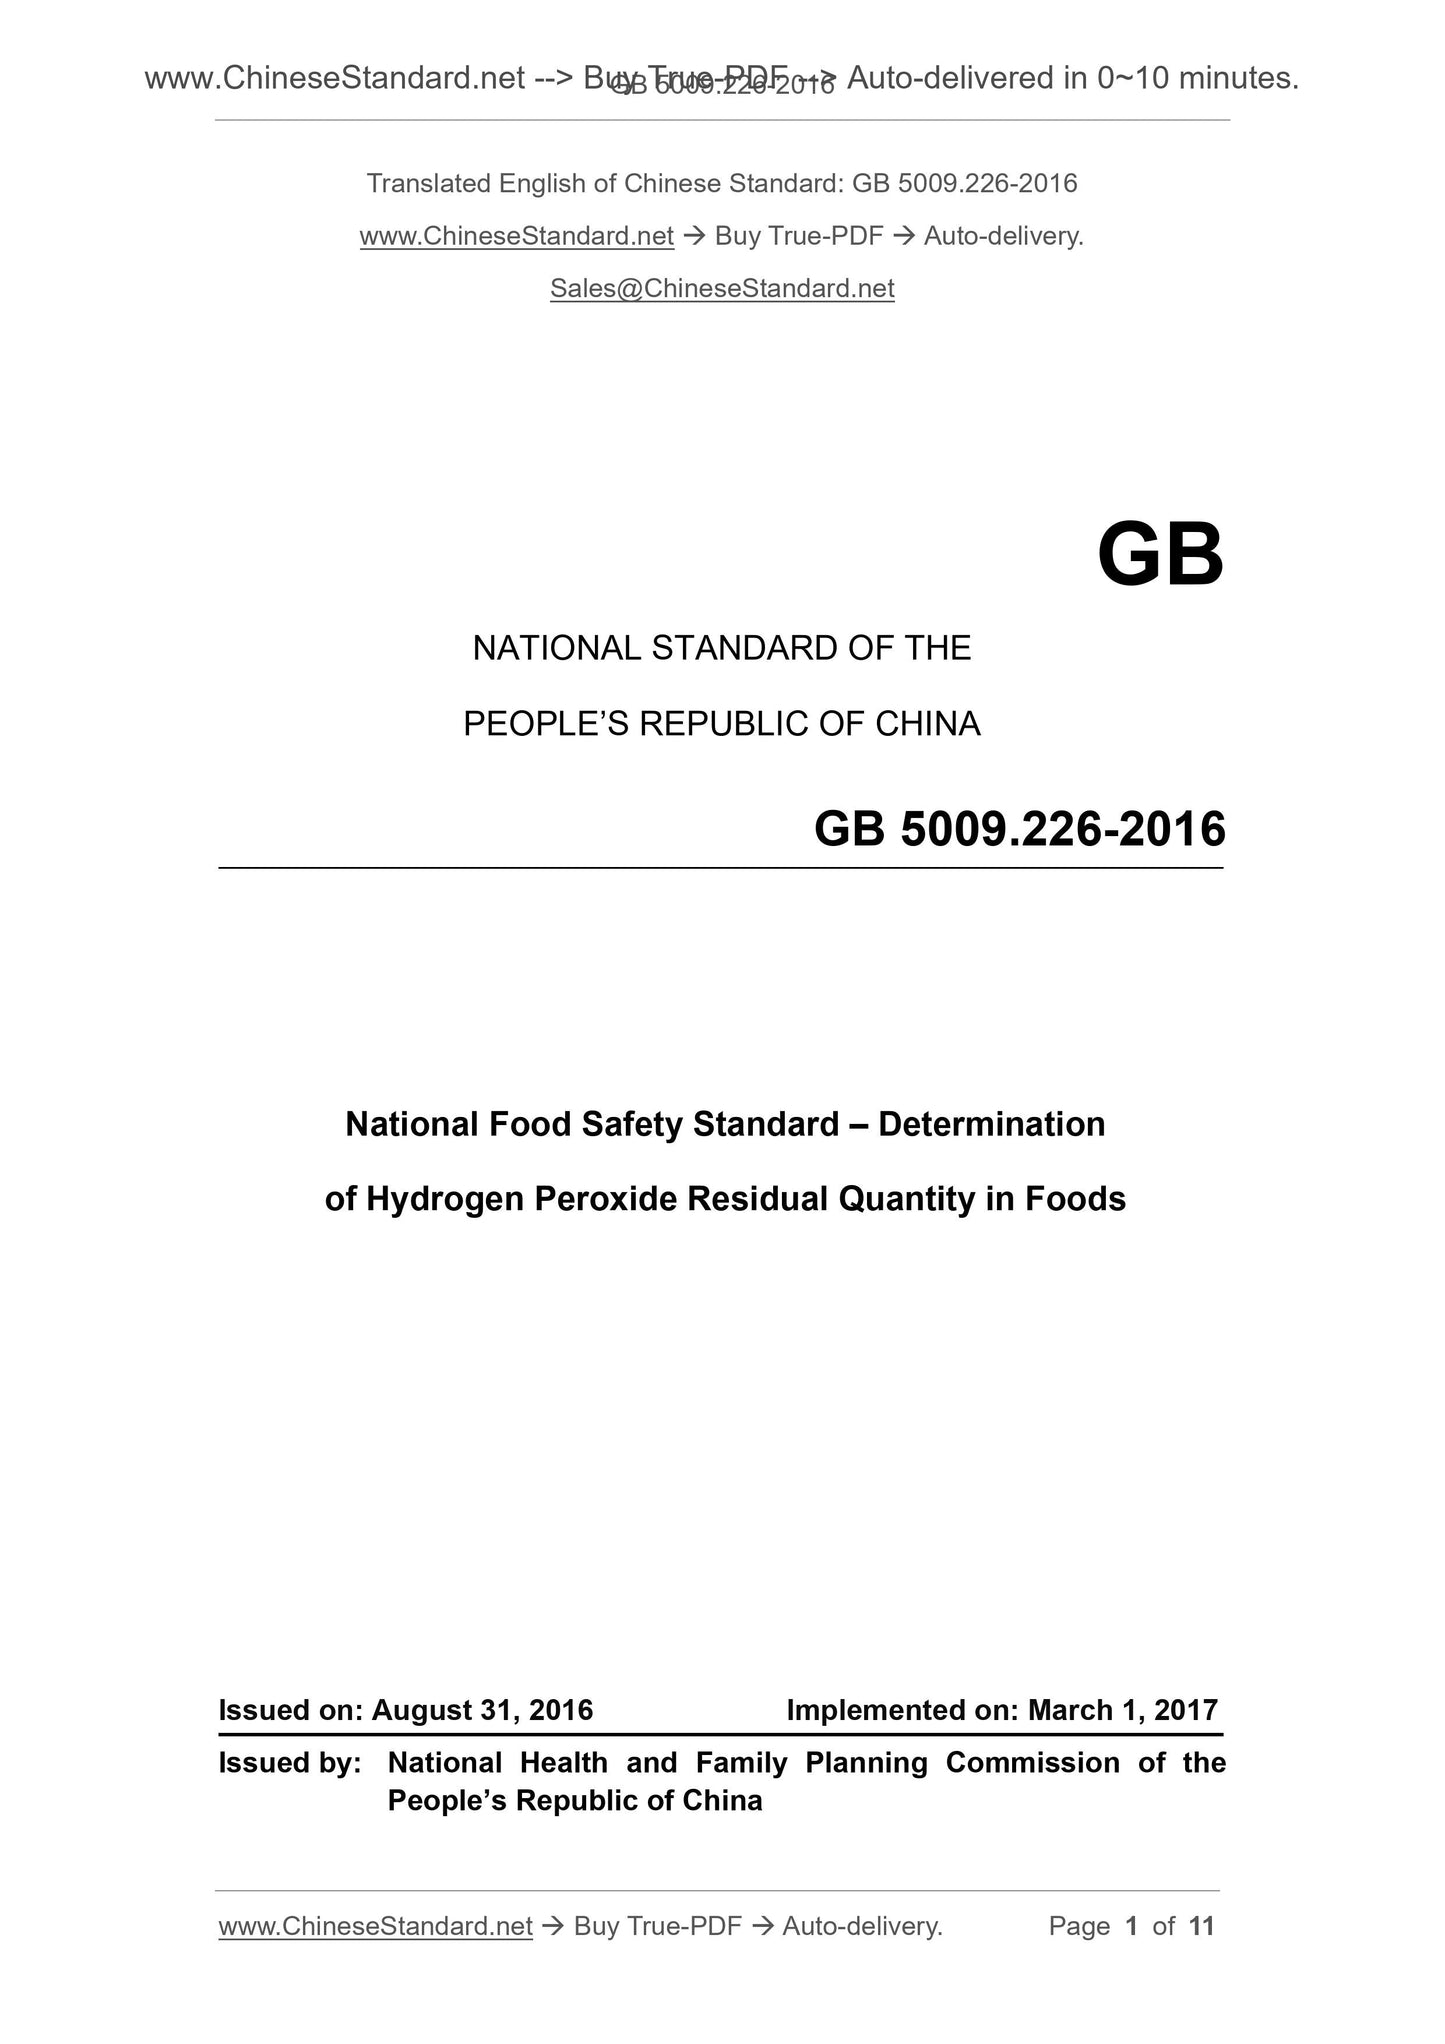 GB 5009.226-2016 Page 1